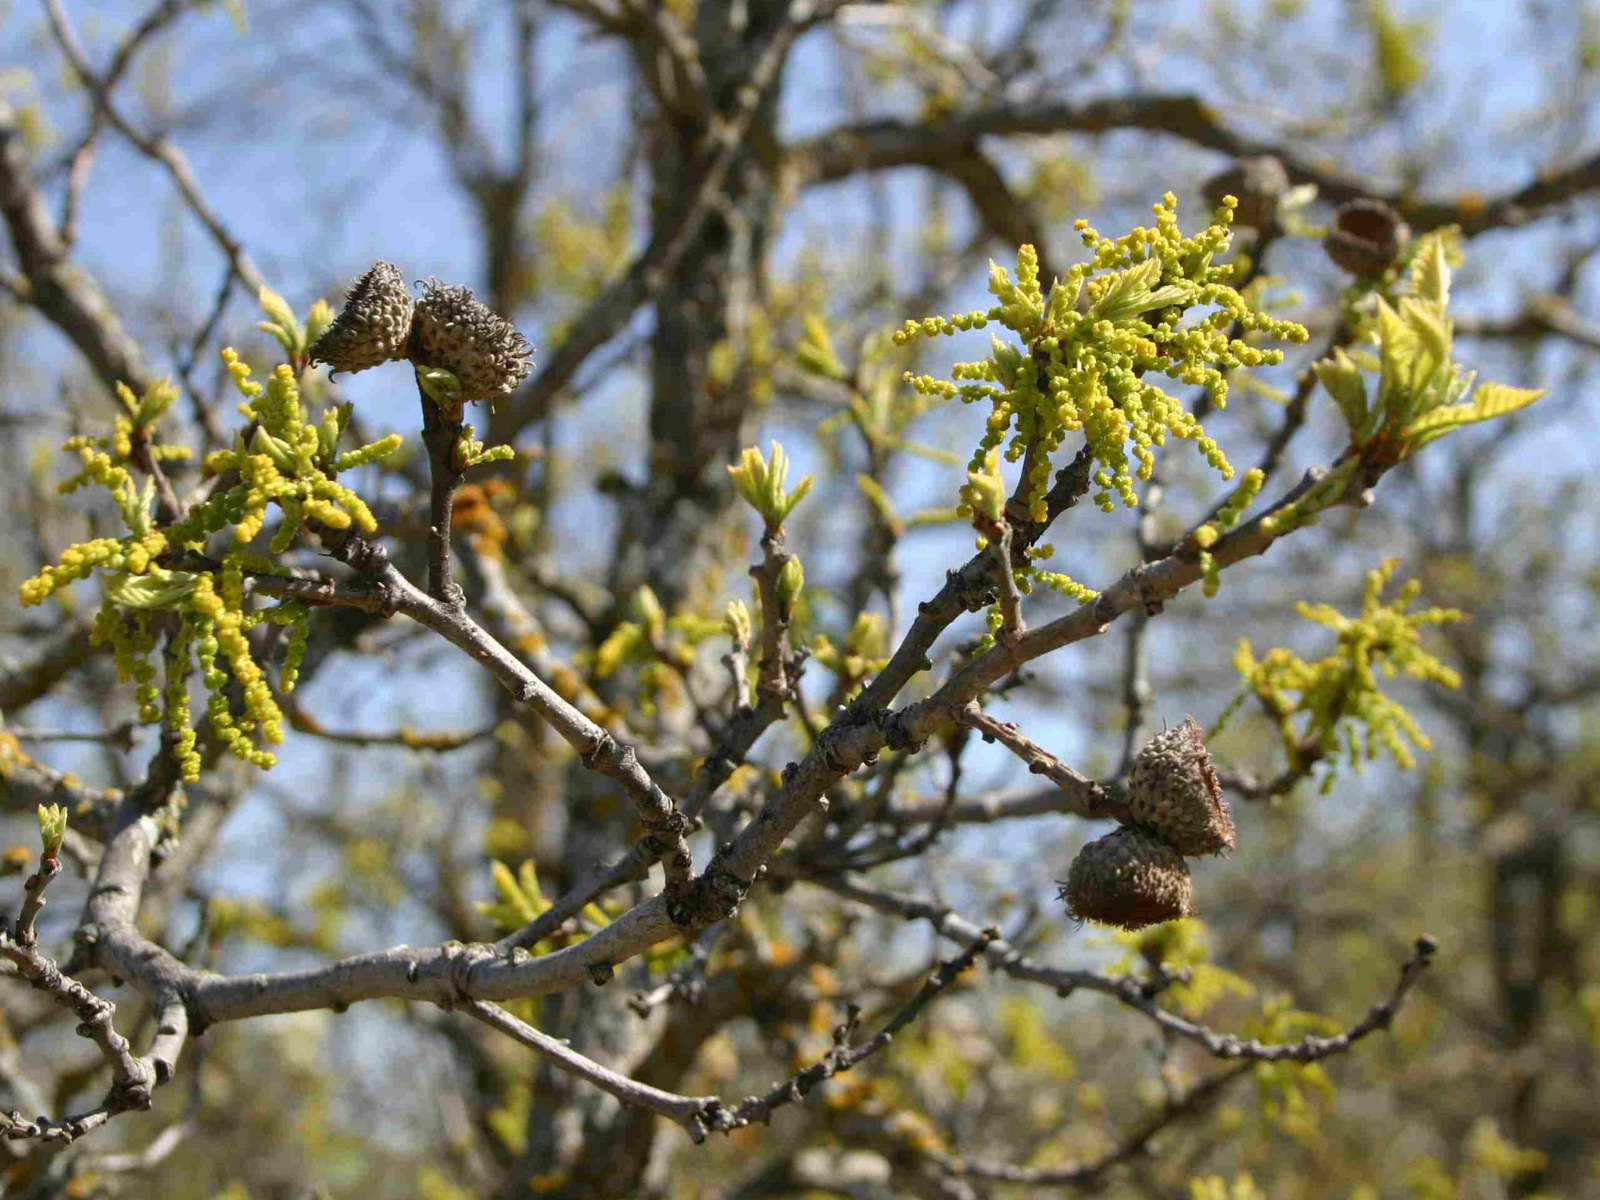 A mid-range view of a tree branch with small budding leaves, and burr-like acorn caps.